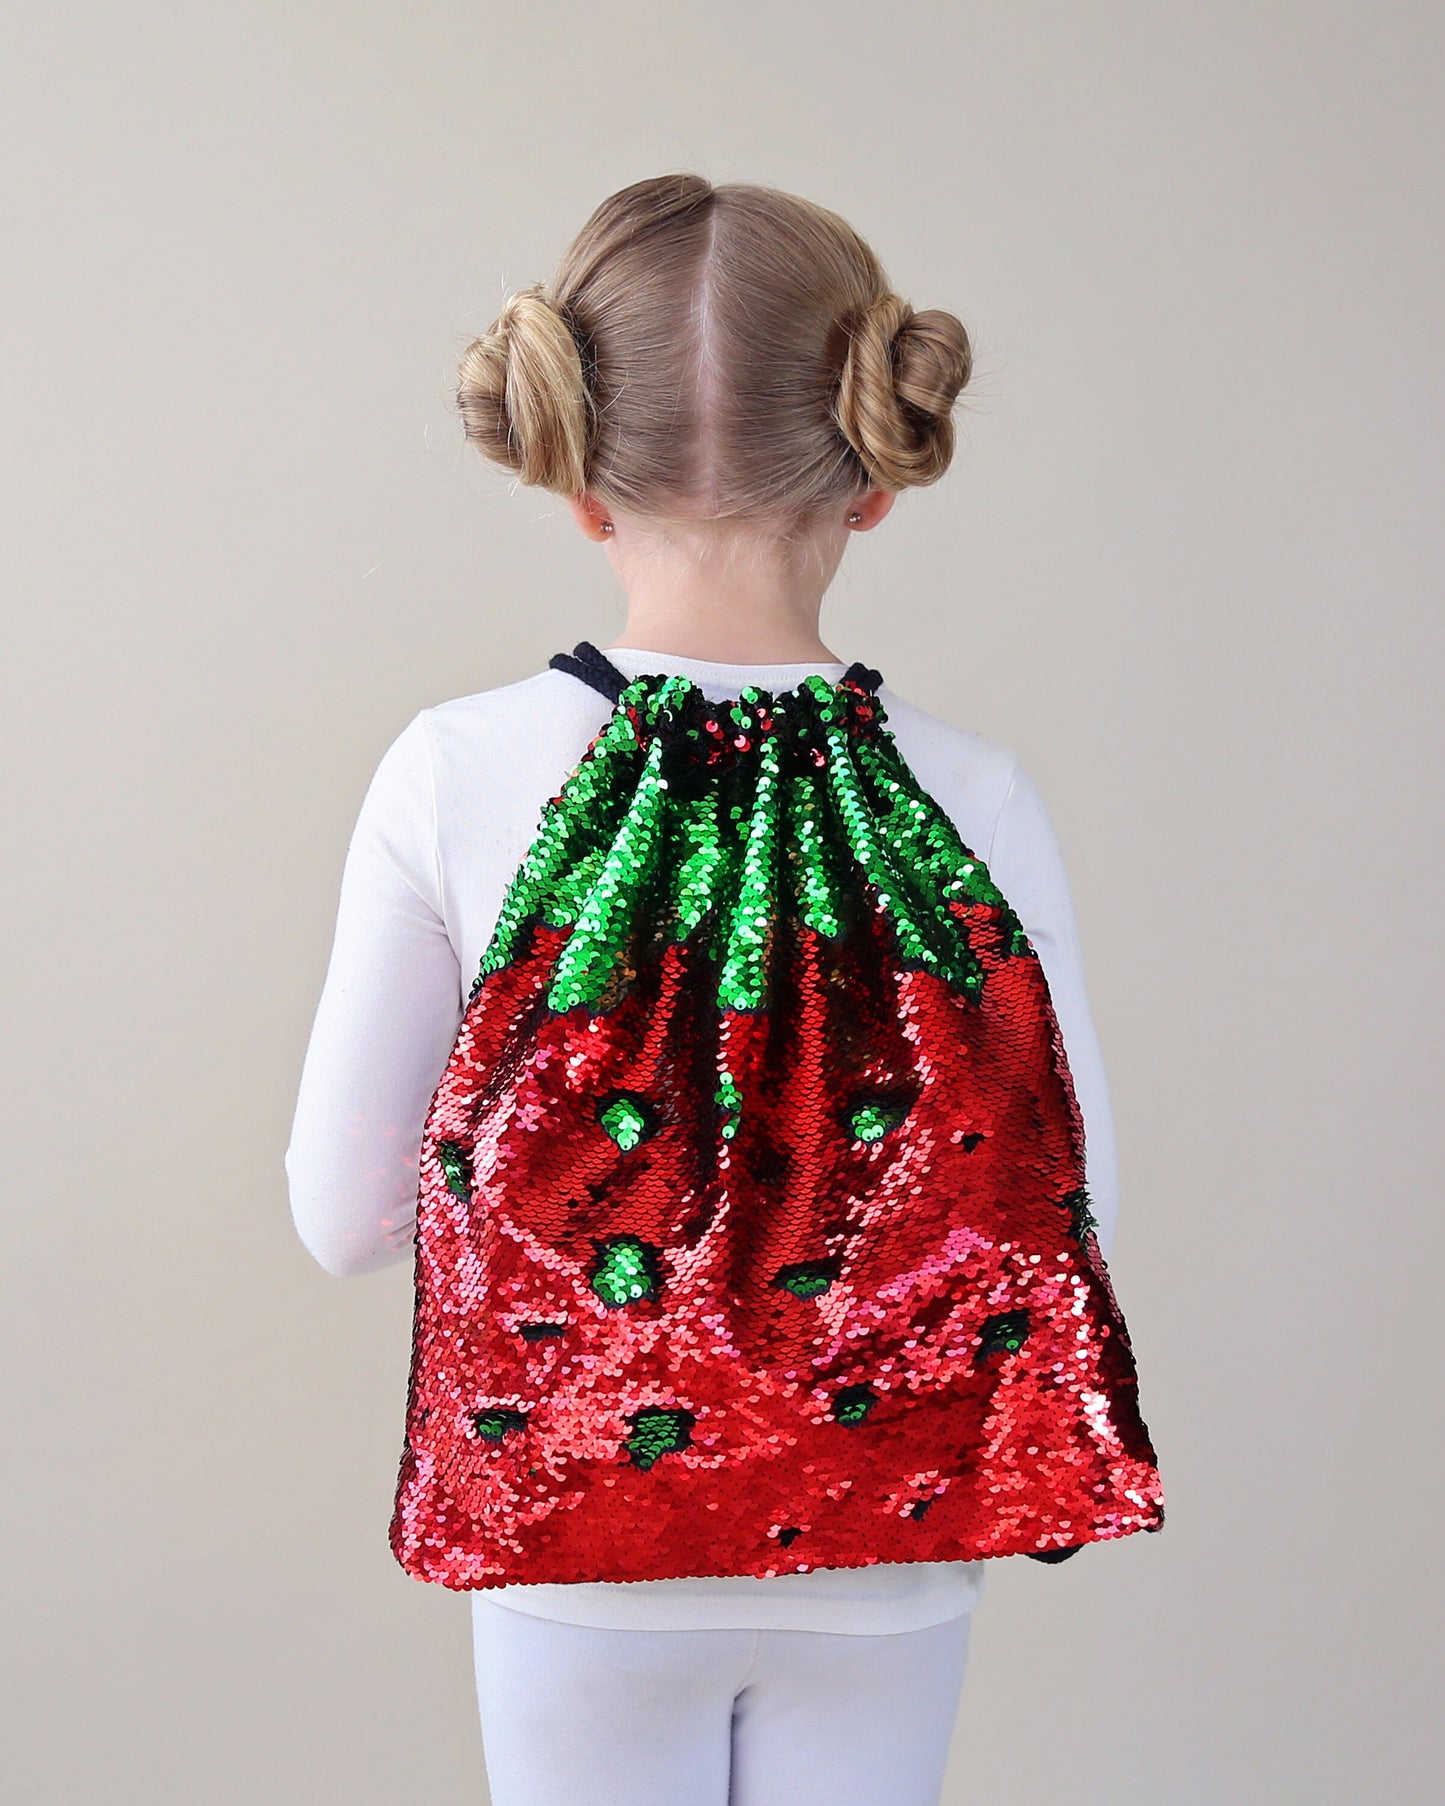 Red and Green Sequin Backpack - Sequin Backpack - Sequin Bag - Reversible Sequin Backpack - Drawstring Flip Sequin Backpack - Sequin Bag